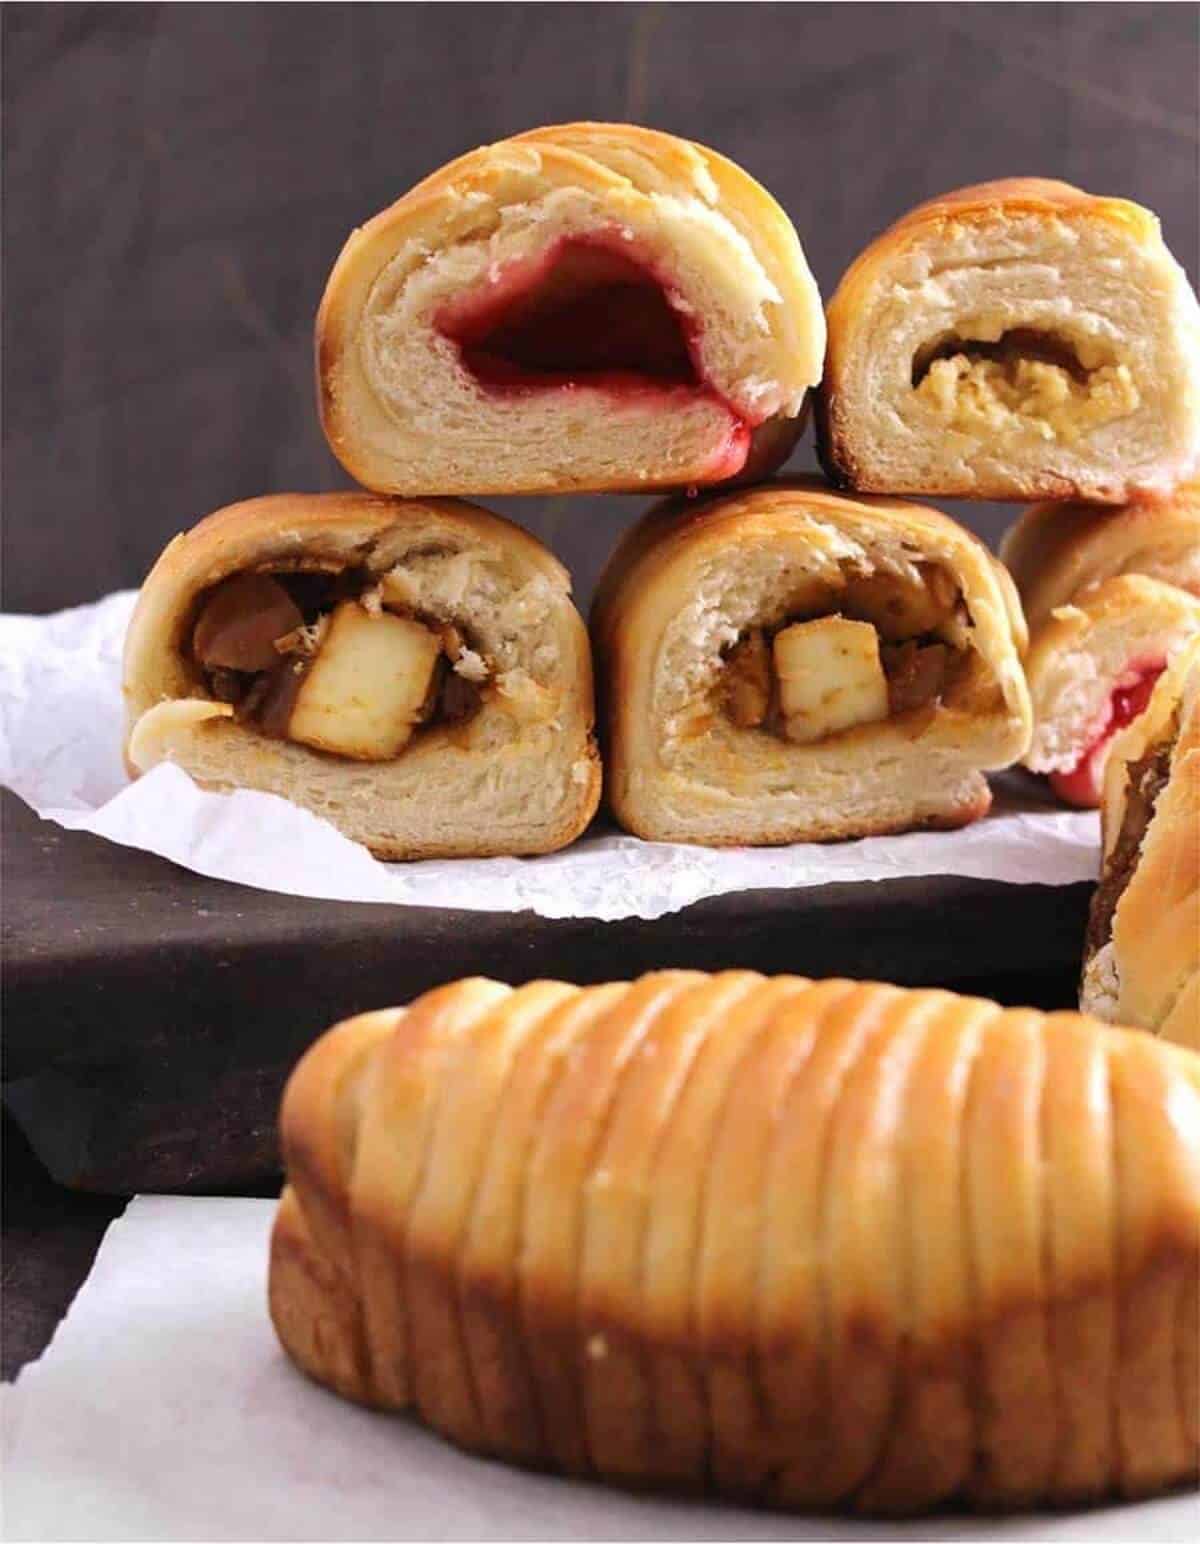 Sweet and savory wool roll bread sliced into half and stacked on top of each other.